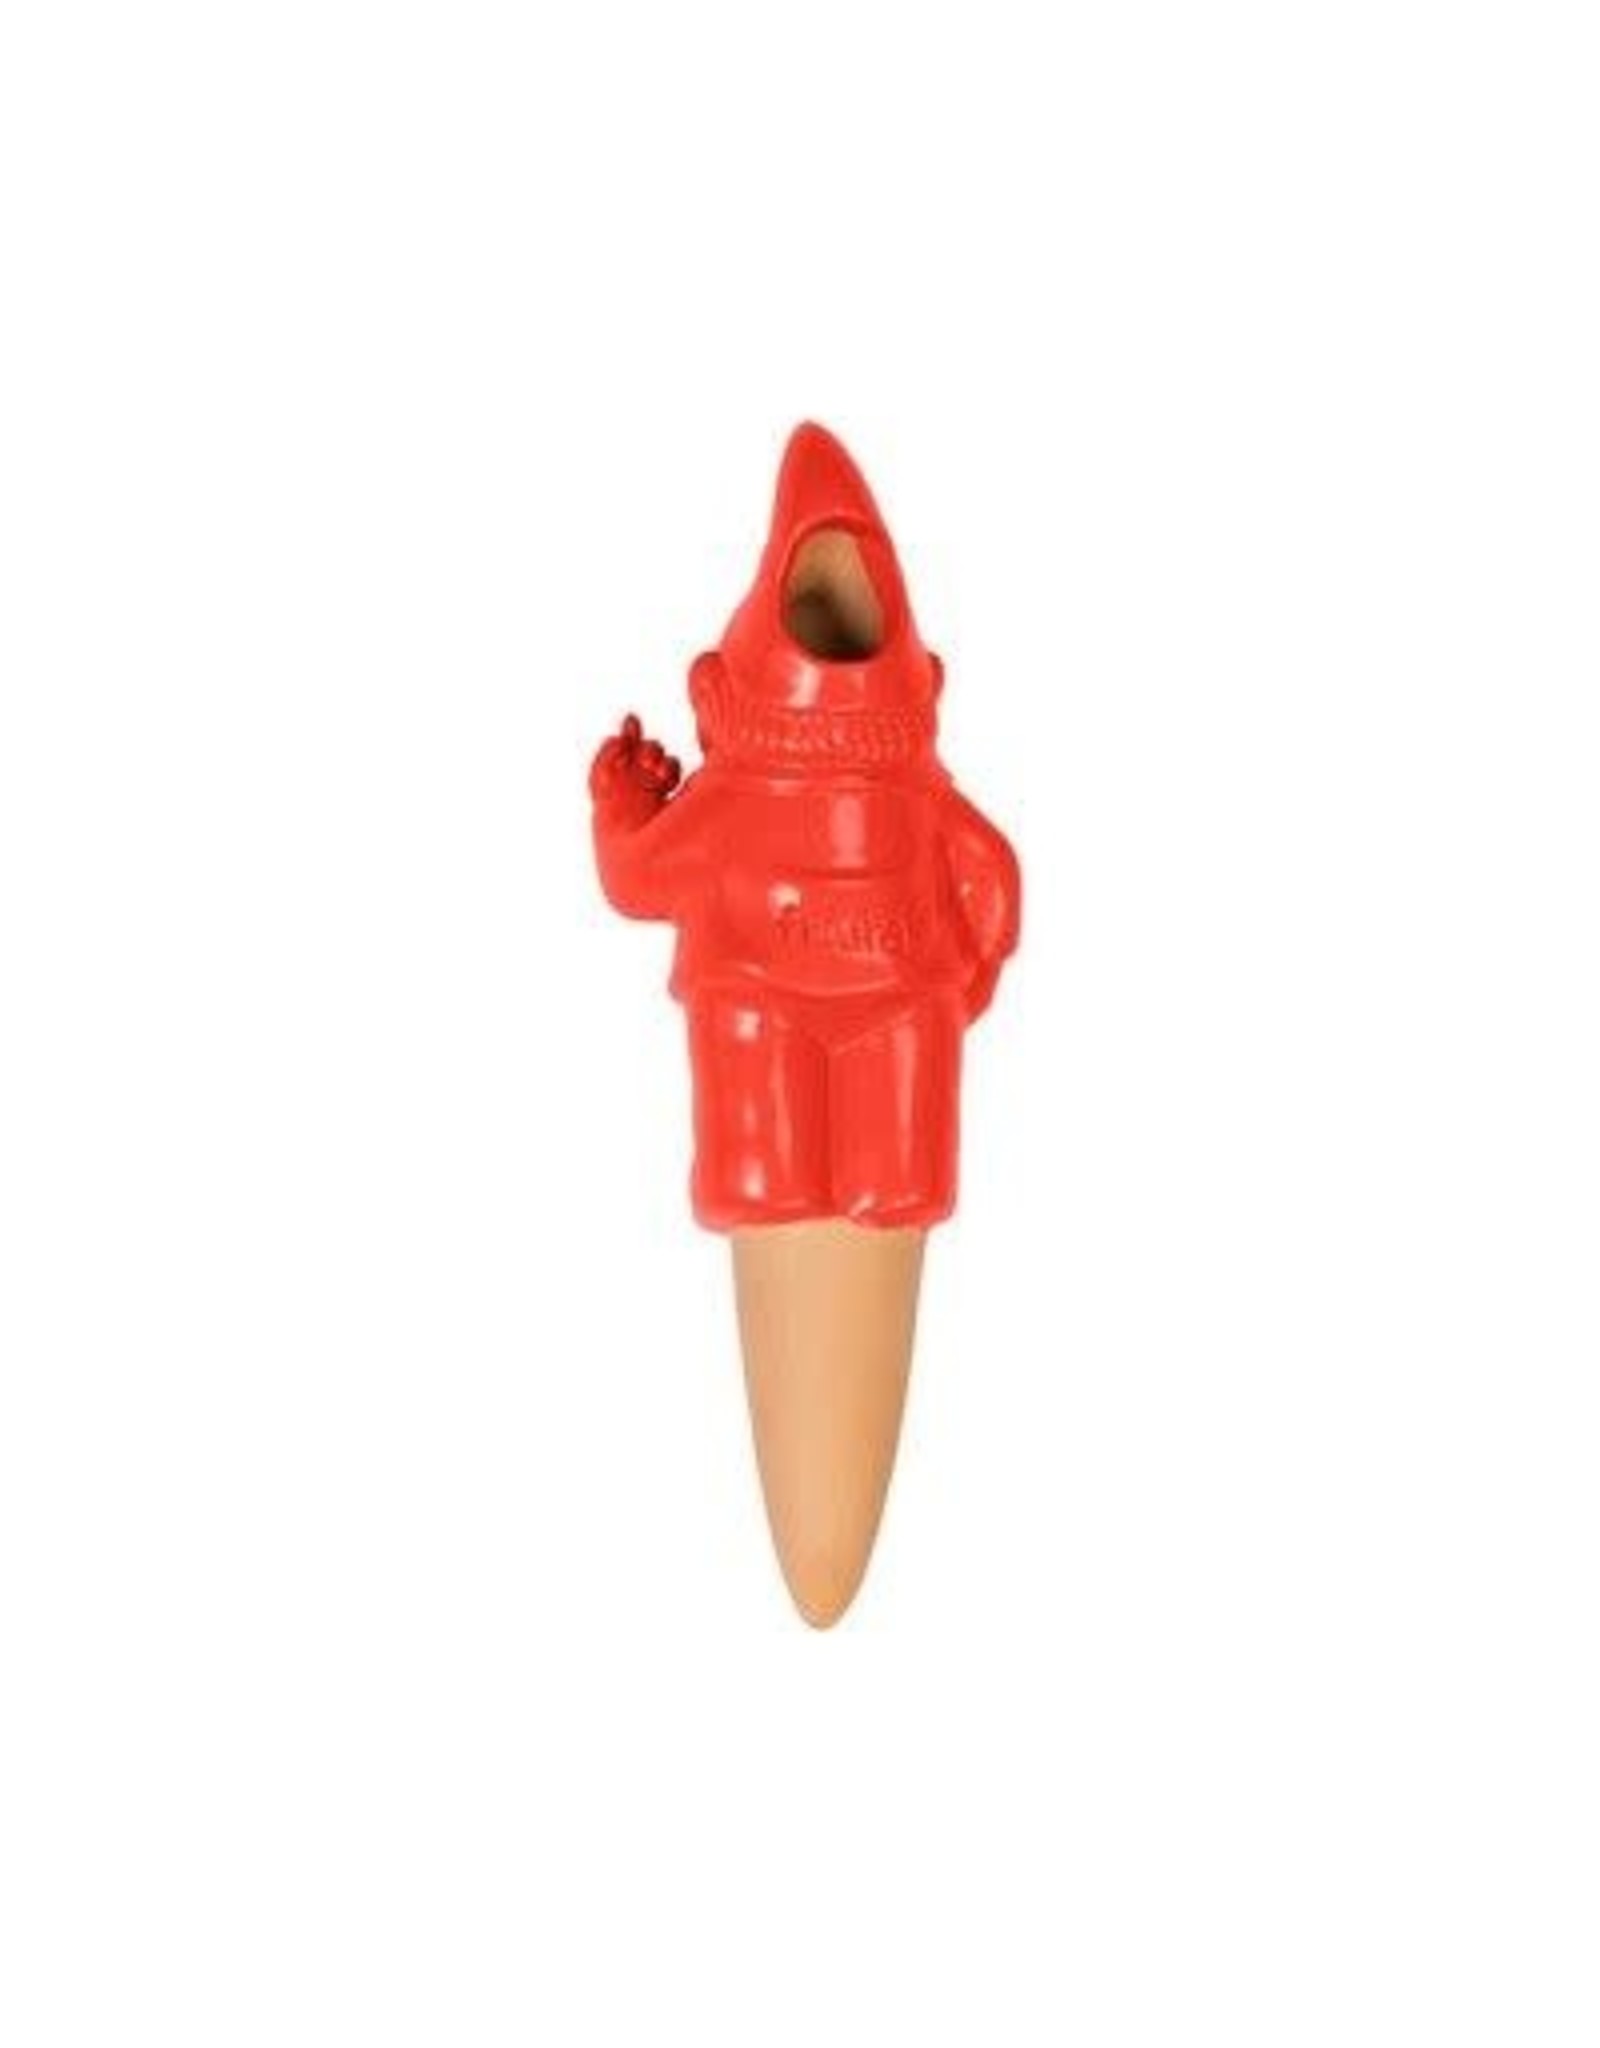 Jelly Jazz water dispenser - gnome